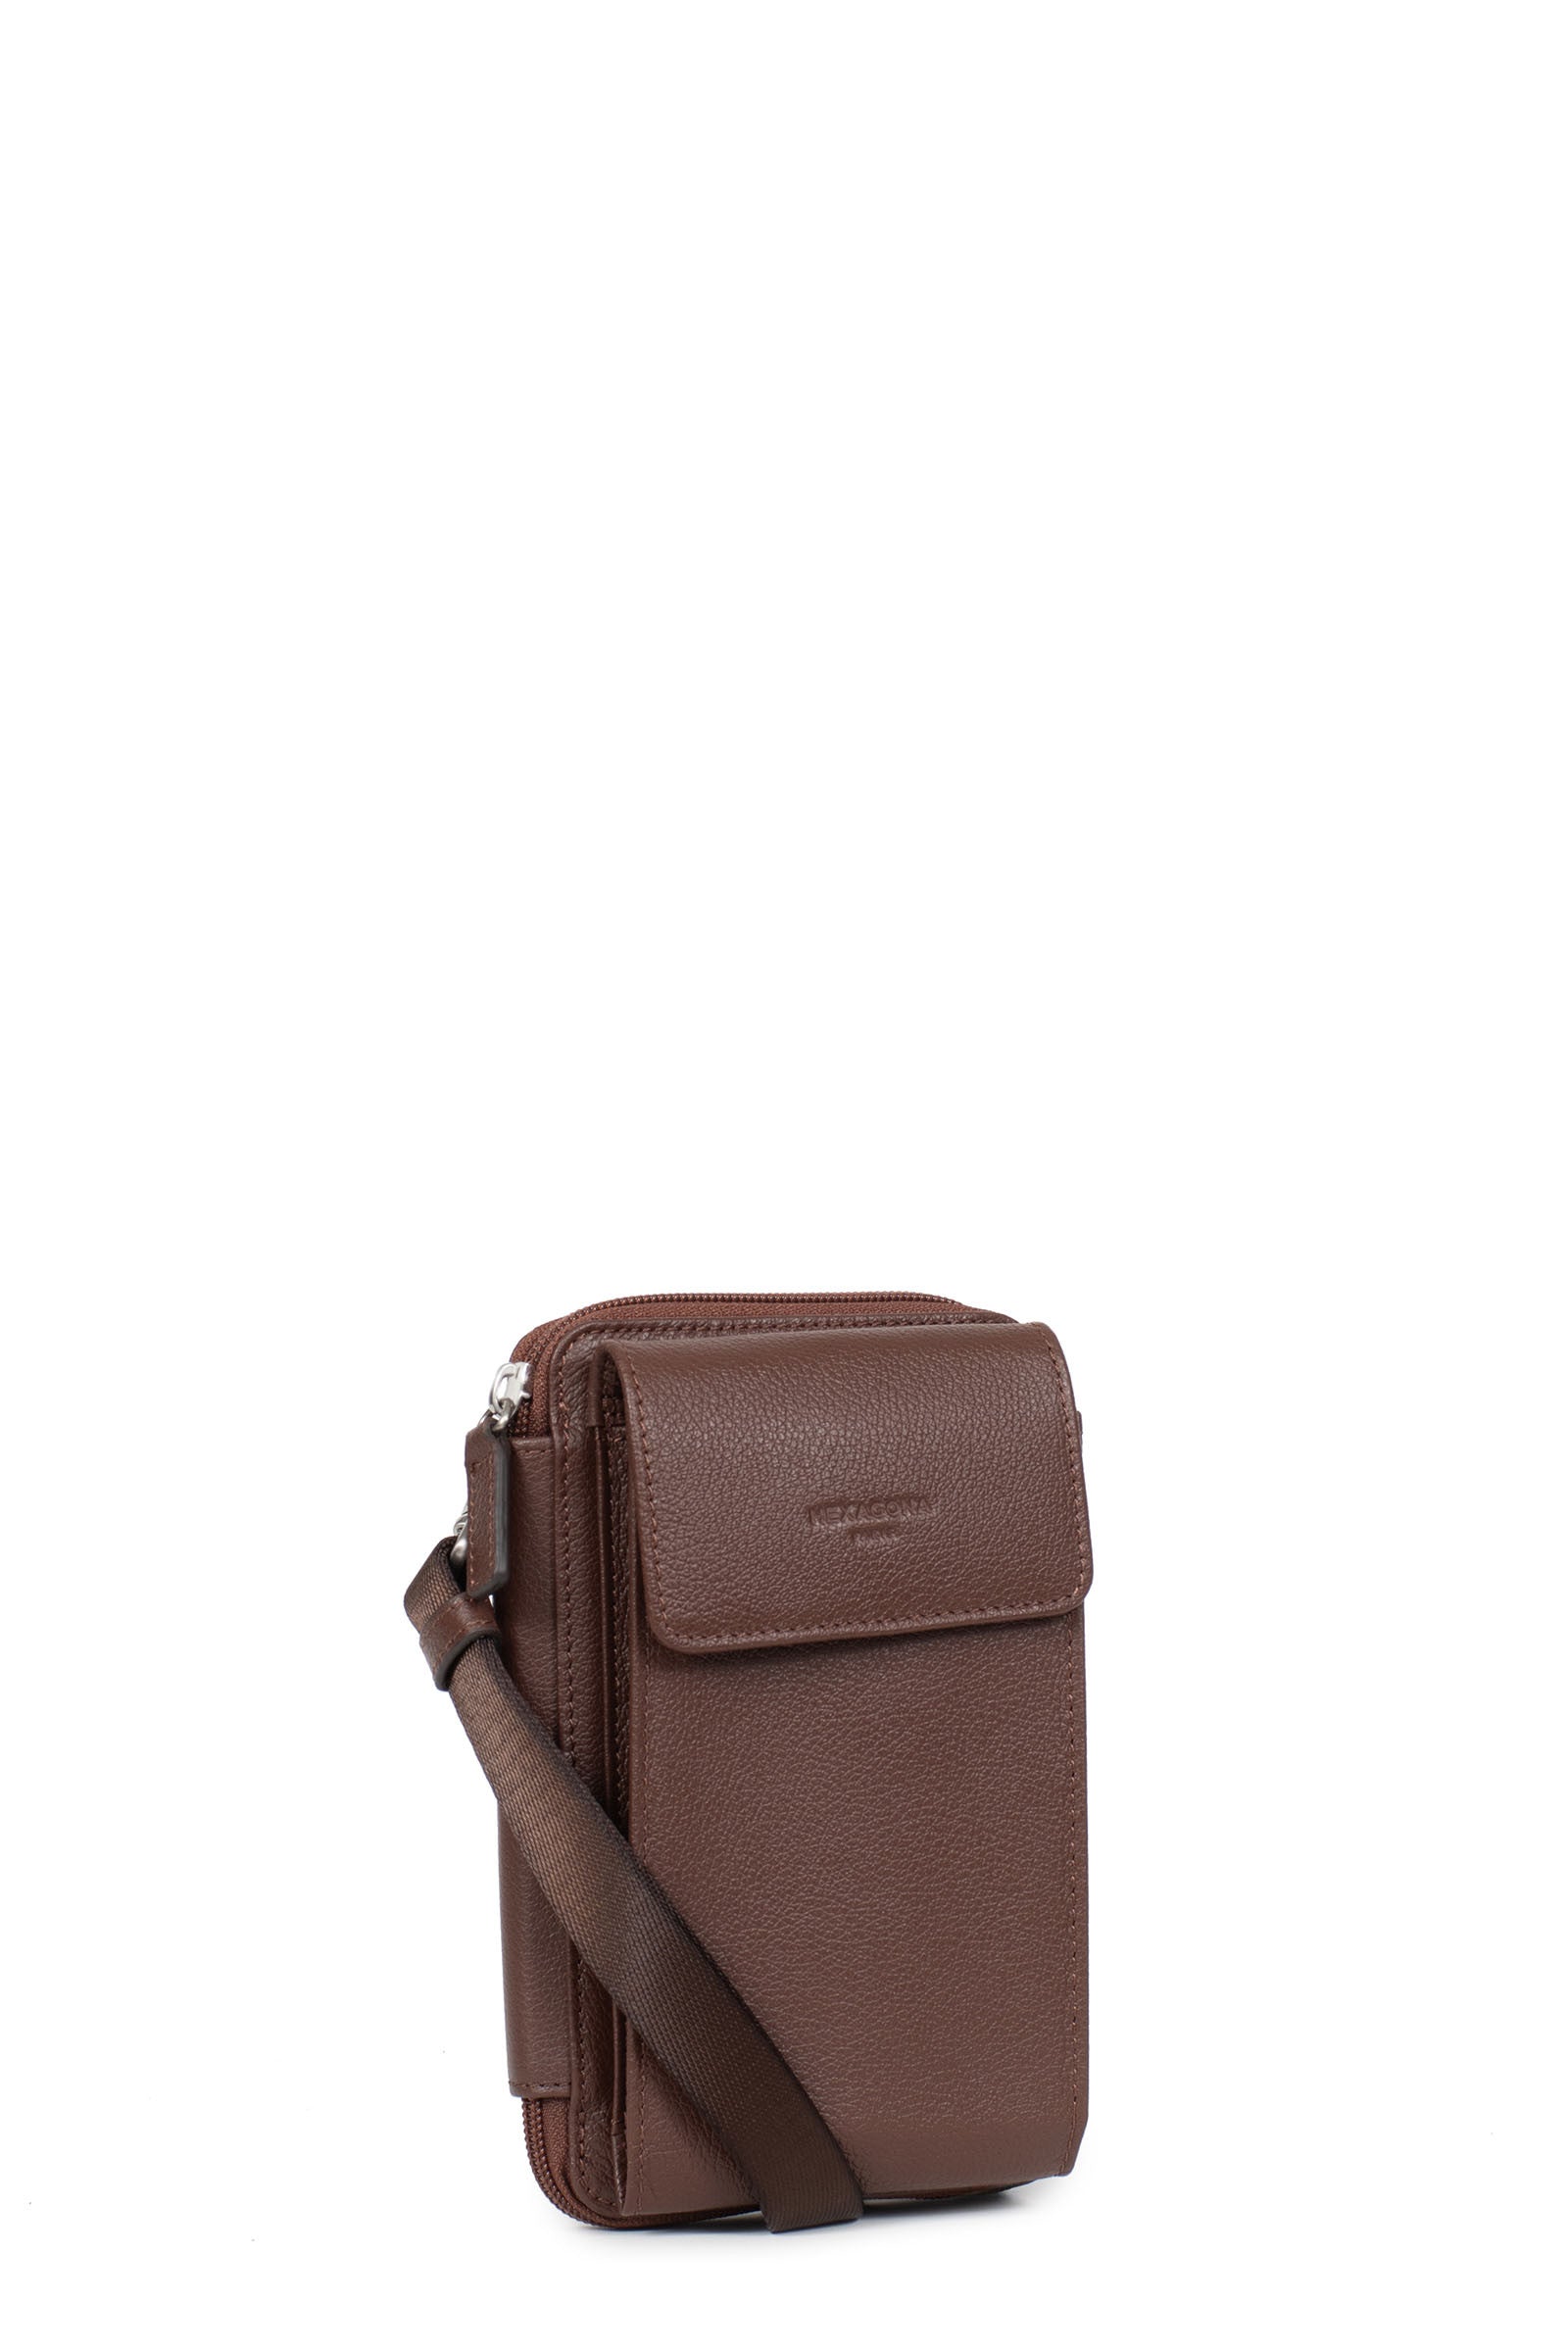 Phone pouch with wallet - Stop RFID - Cowhide leather